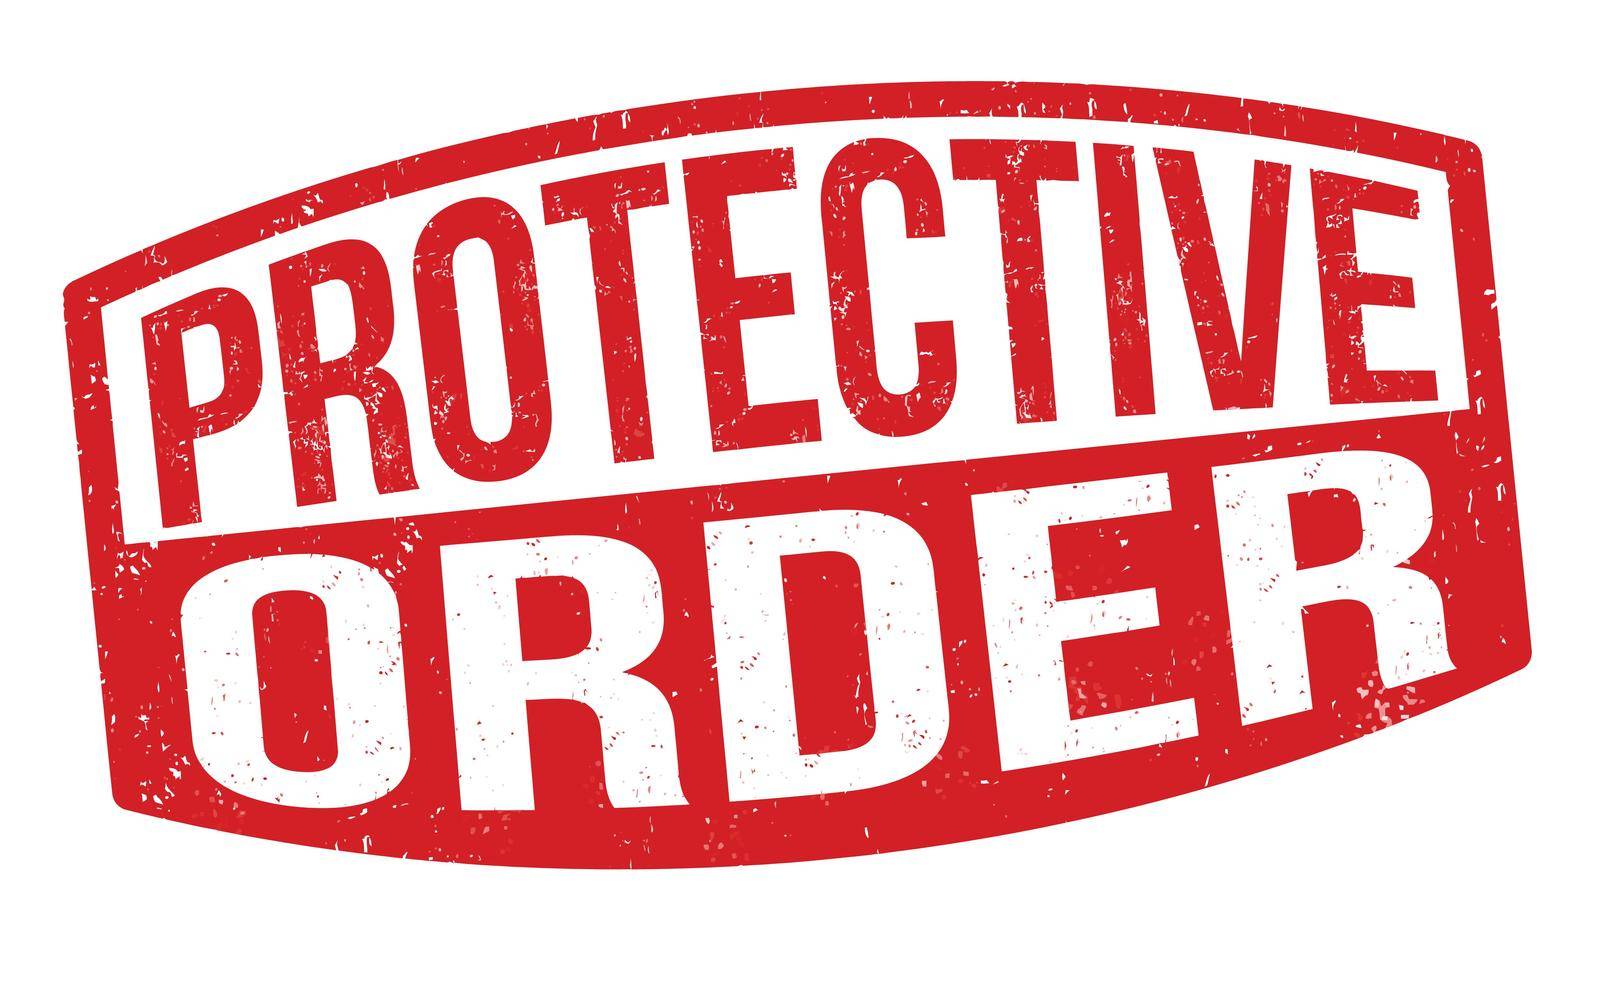 Protective order grunge rubber stamp  by roxanabalint